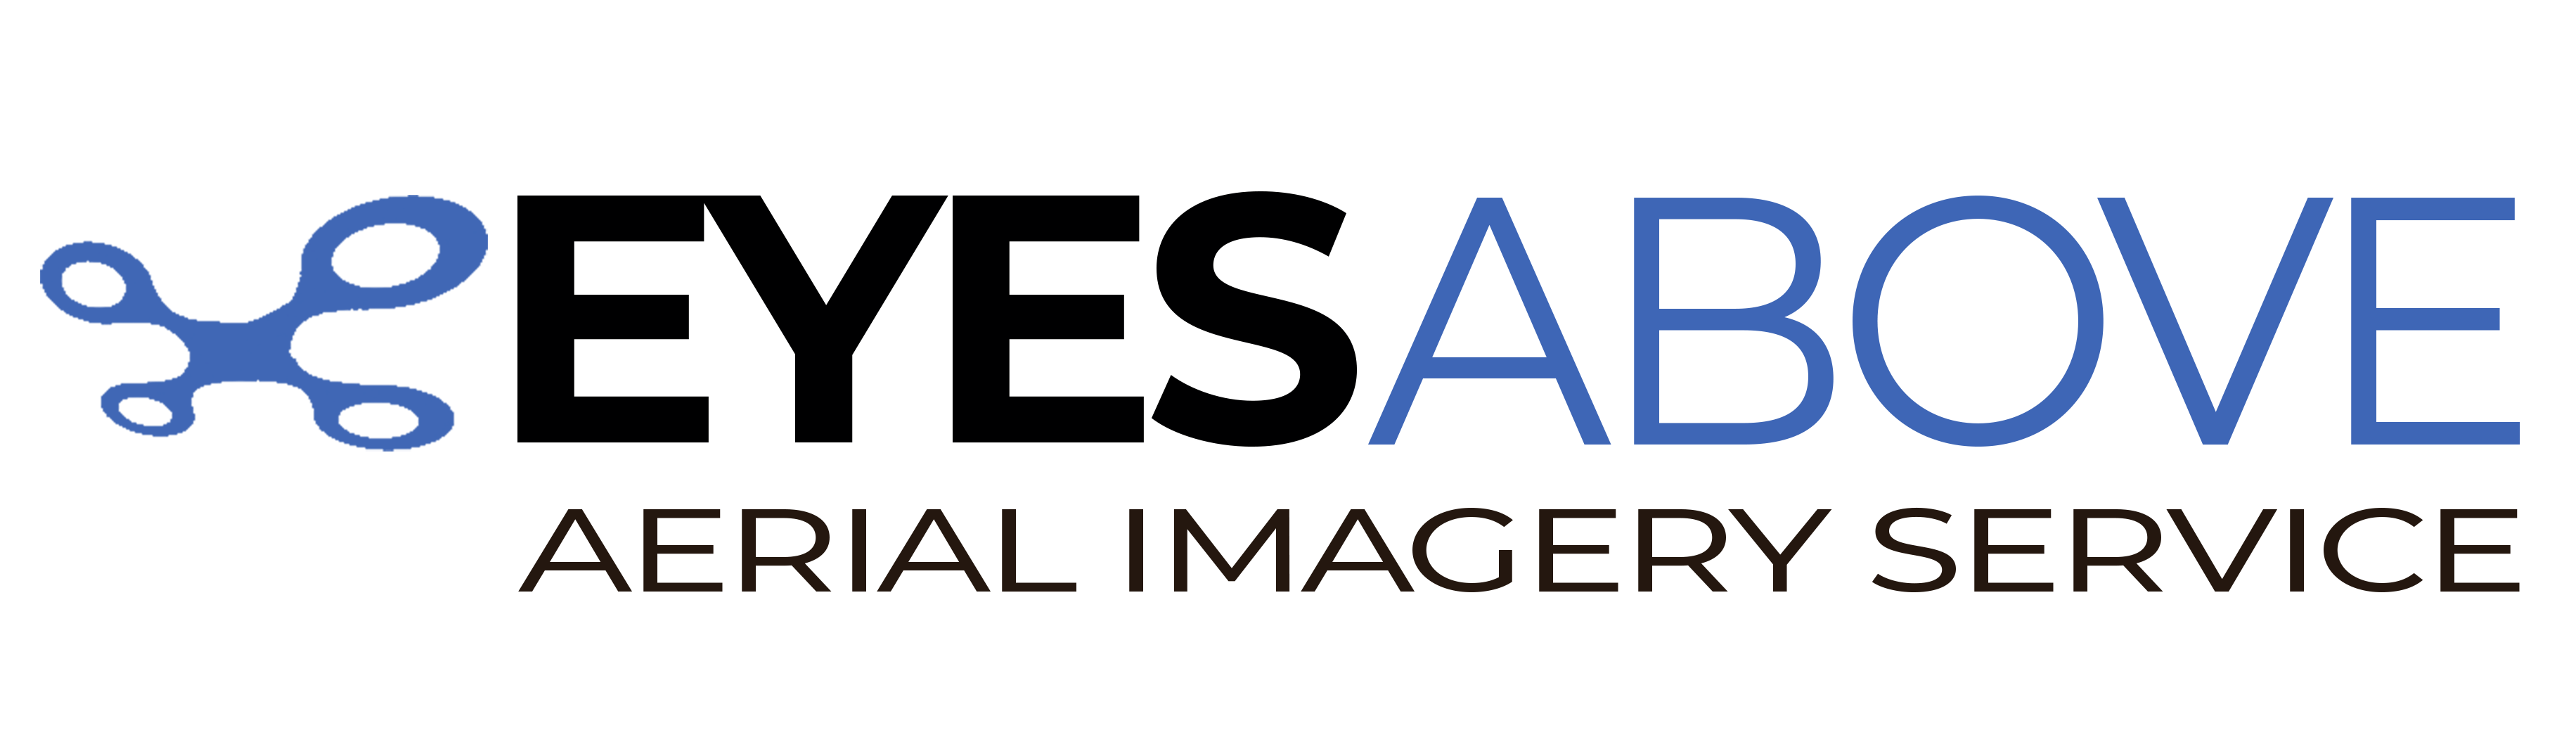 Eyes Above Video & Imagery Services